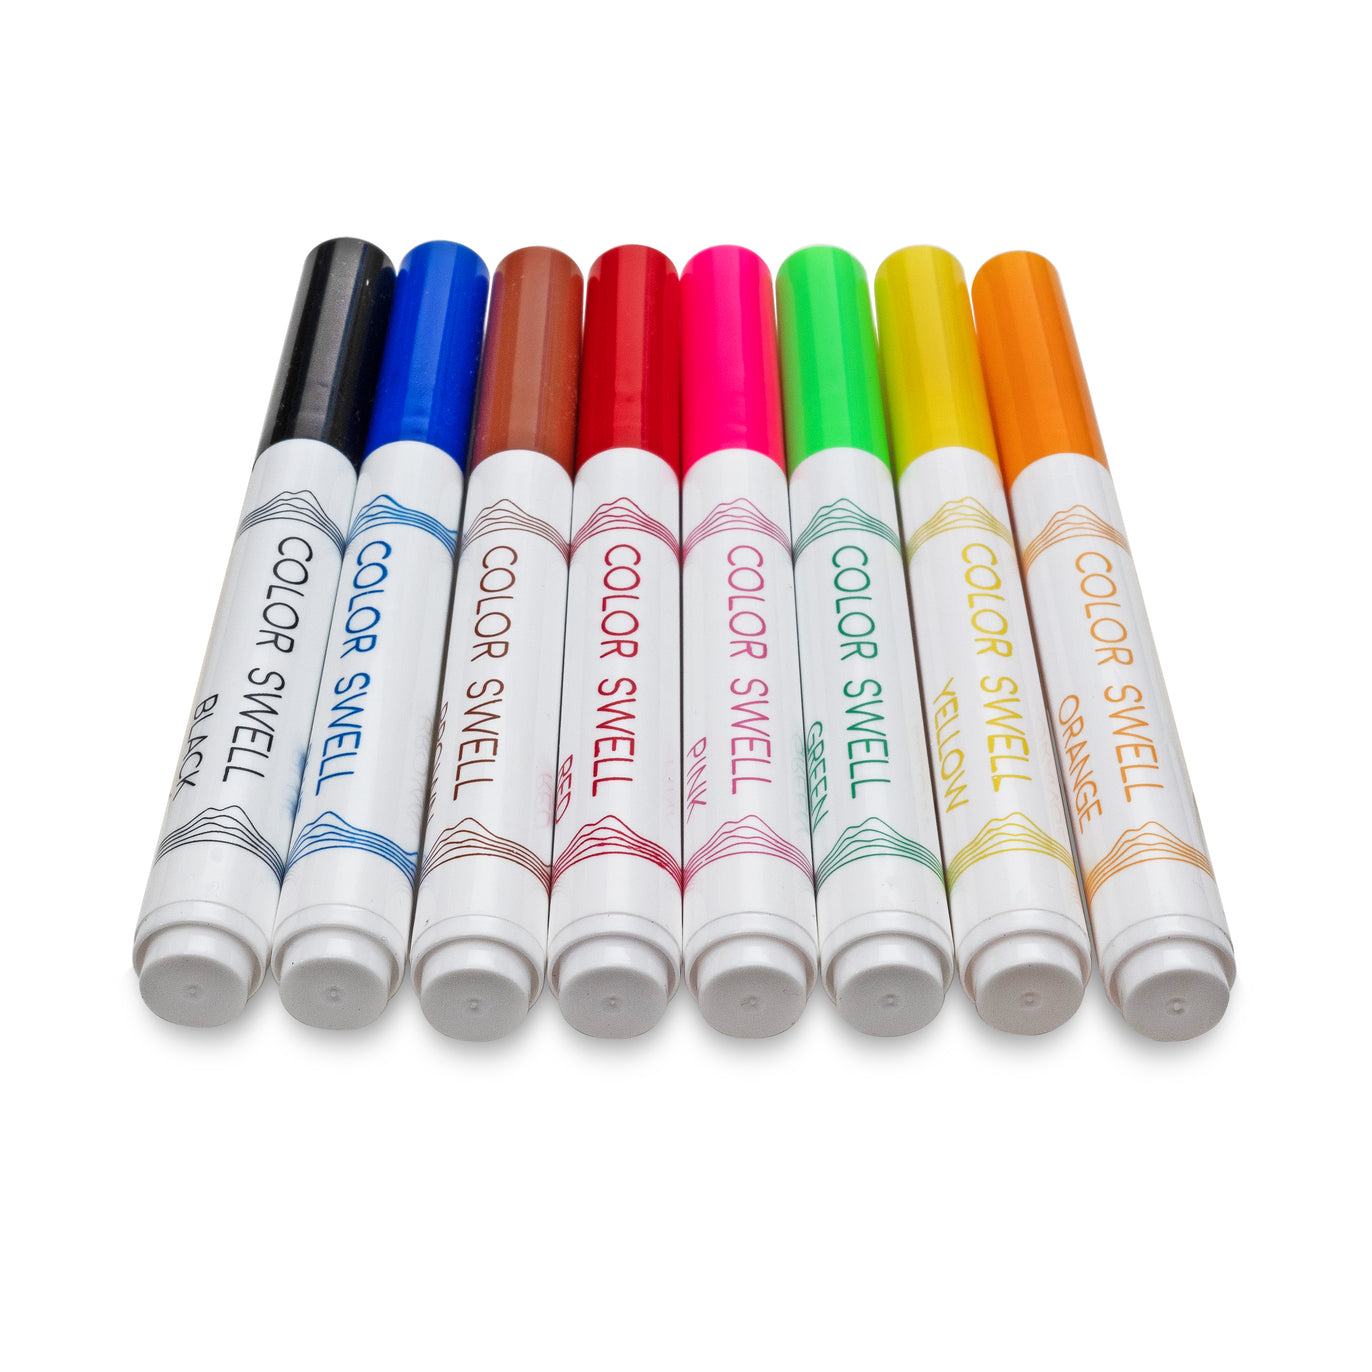 Crayola Super Tips Washable Markers Age 3+ - 50 Count